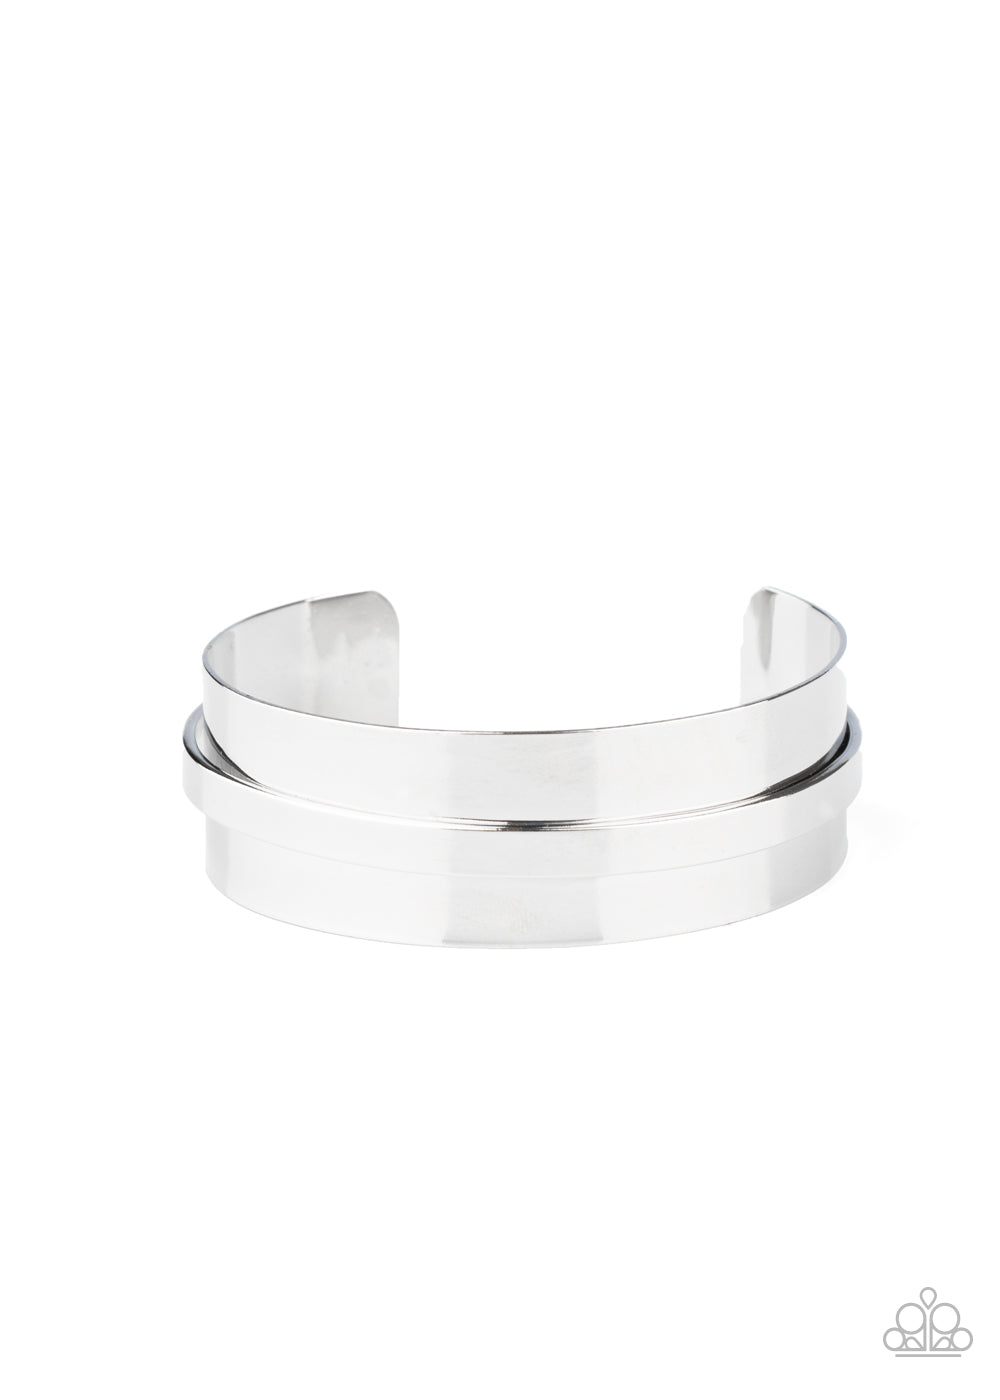 at silver bar curves around the center of thick silver cuff, creating a chic stacked look.